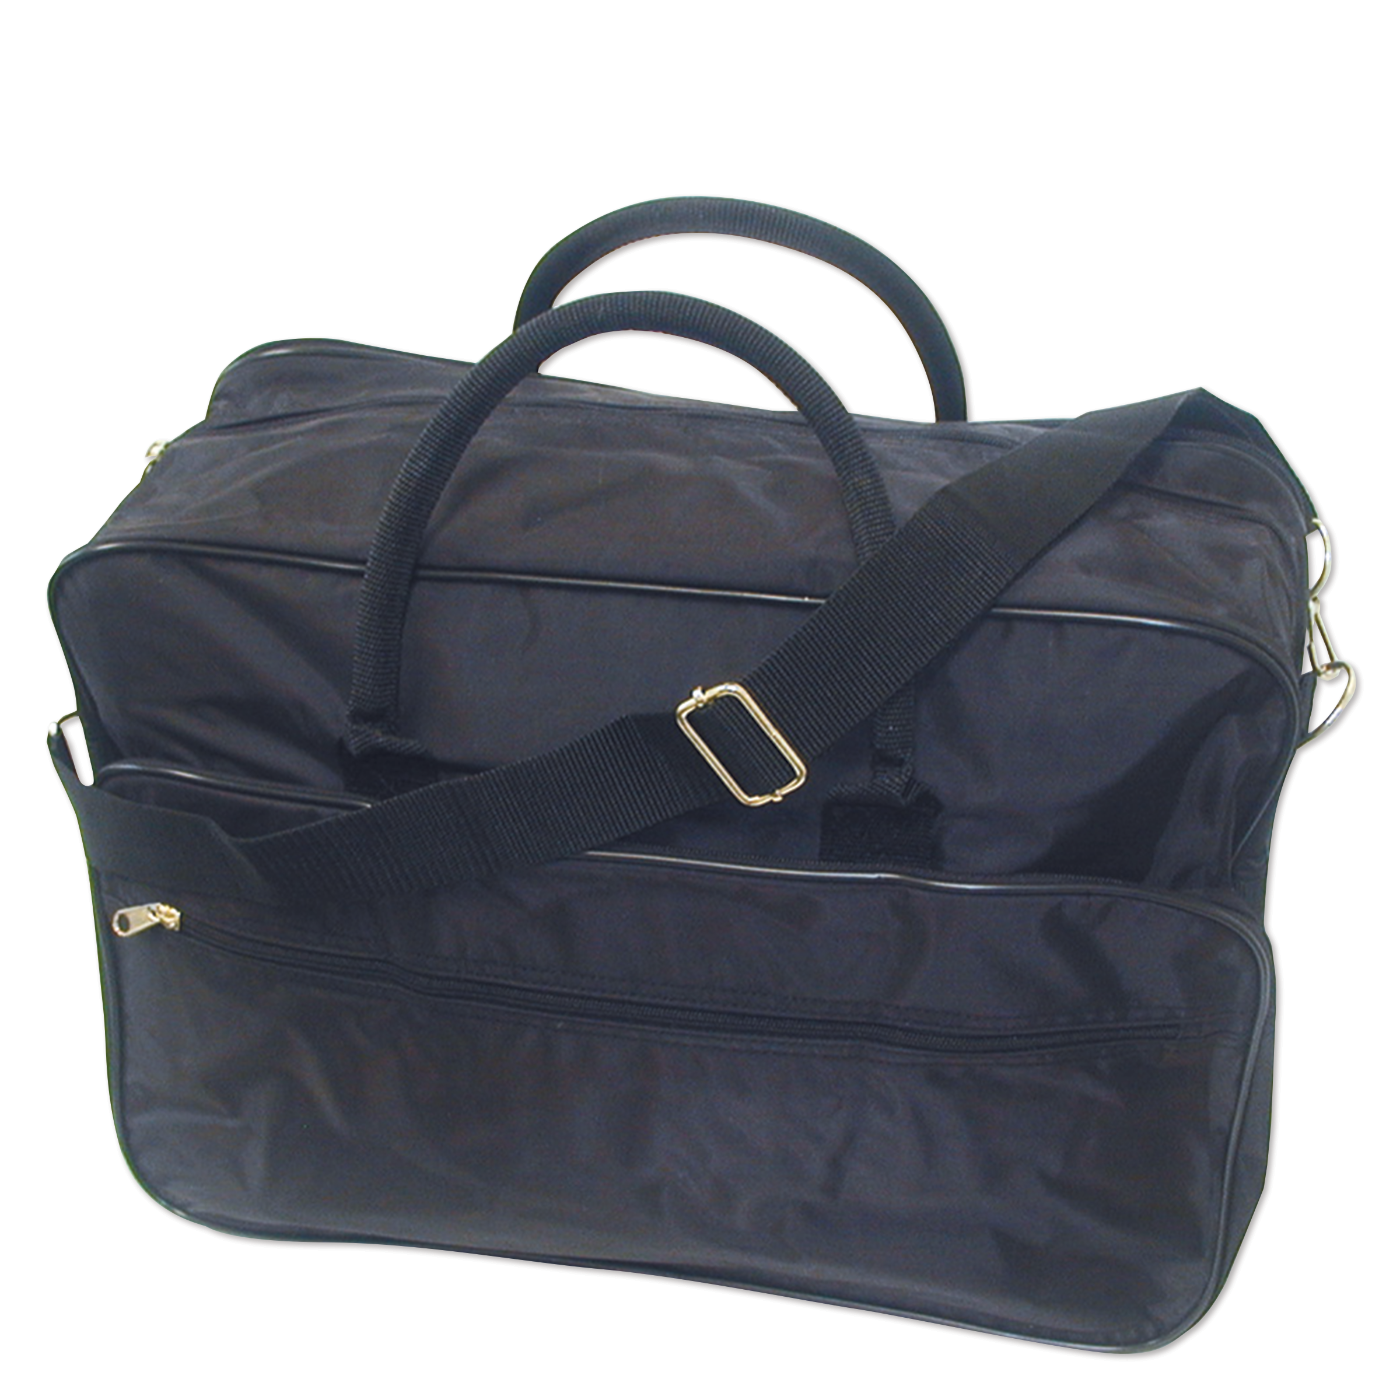 Nylon Tote, Carry-All